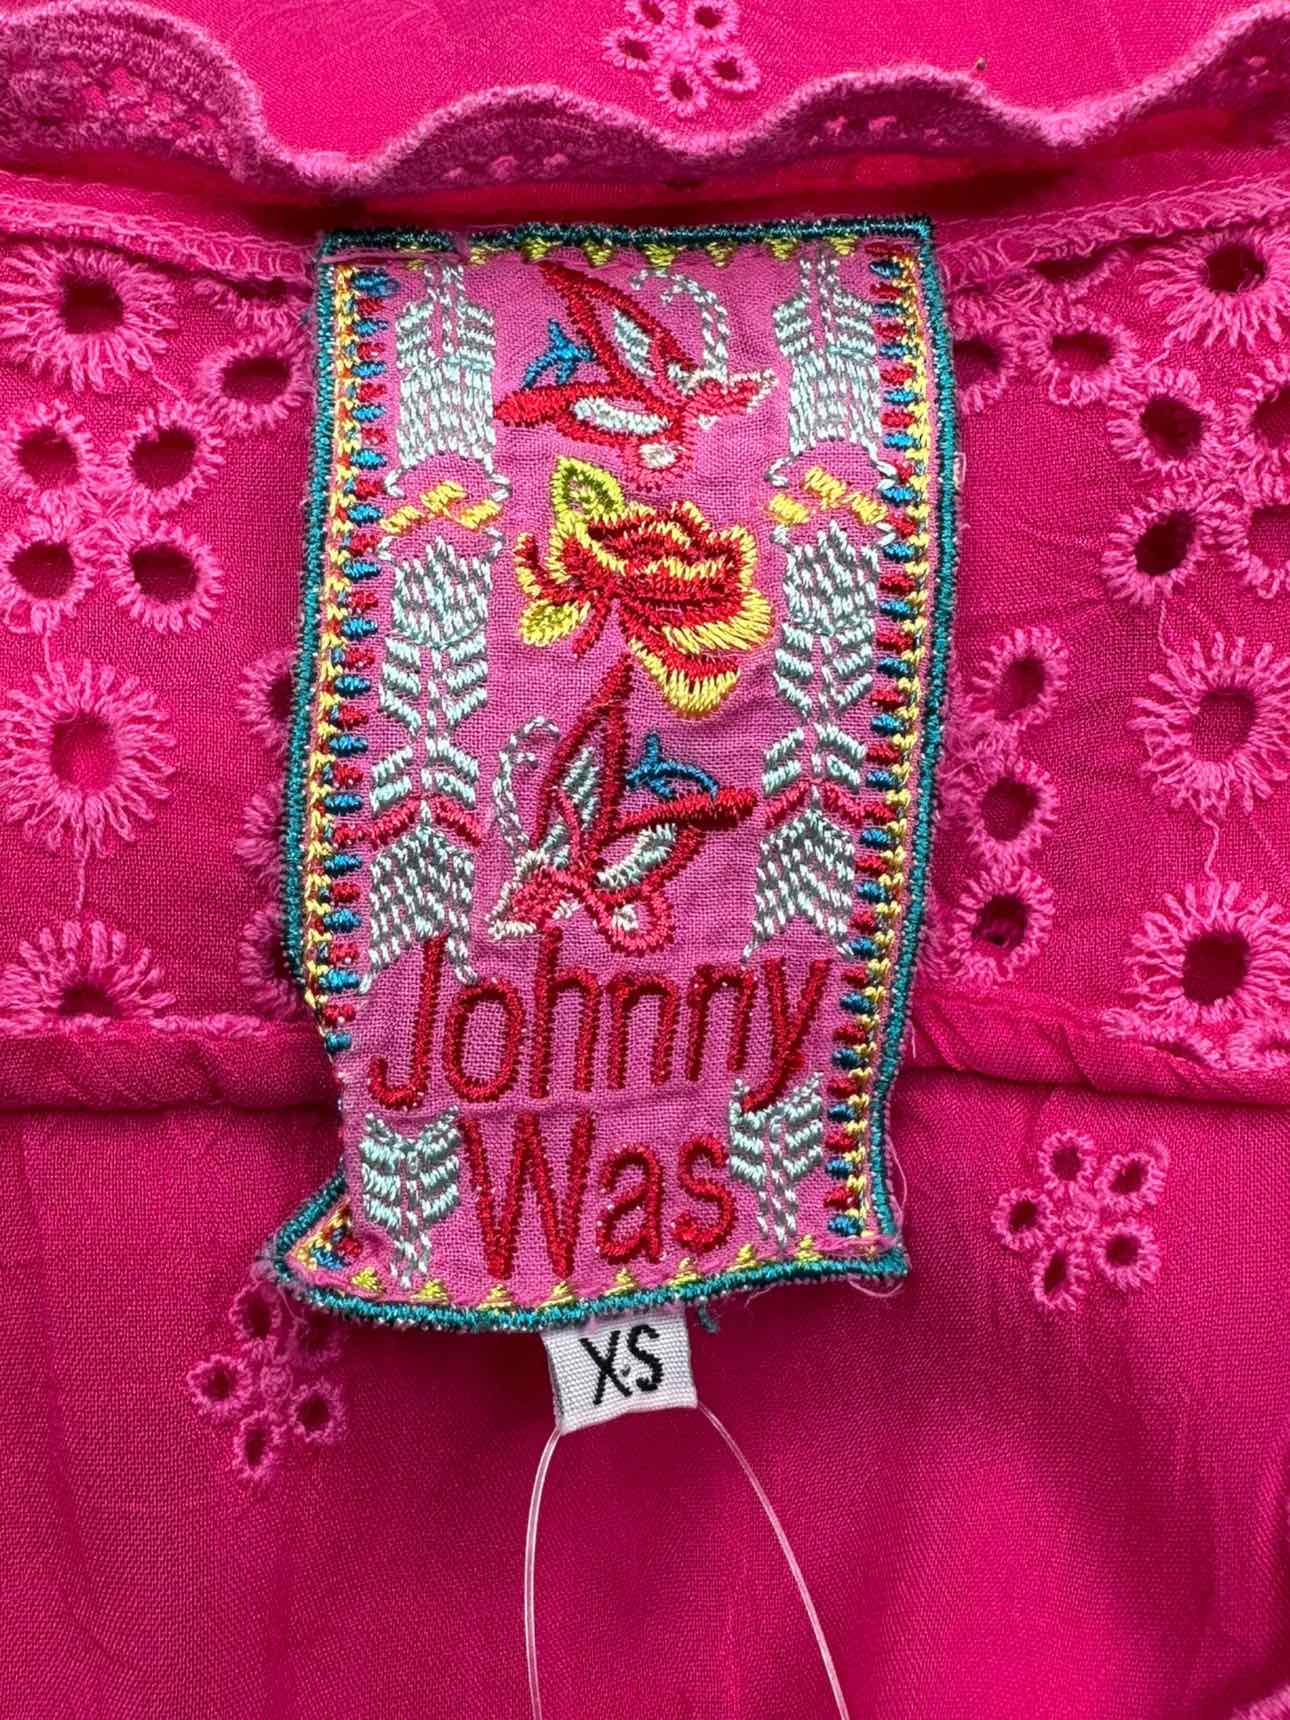 Johnny Was Pink Embroidered Popover Tunic Size XS